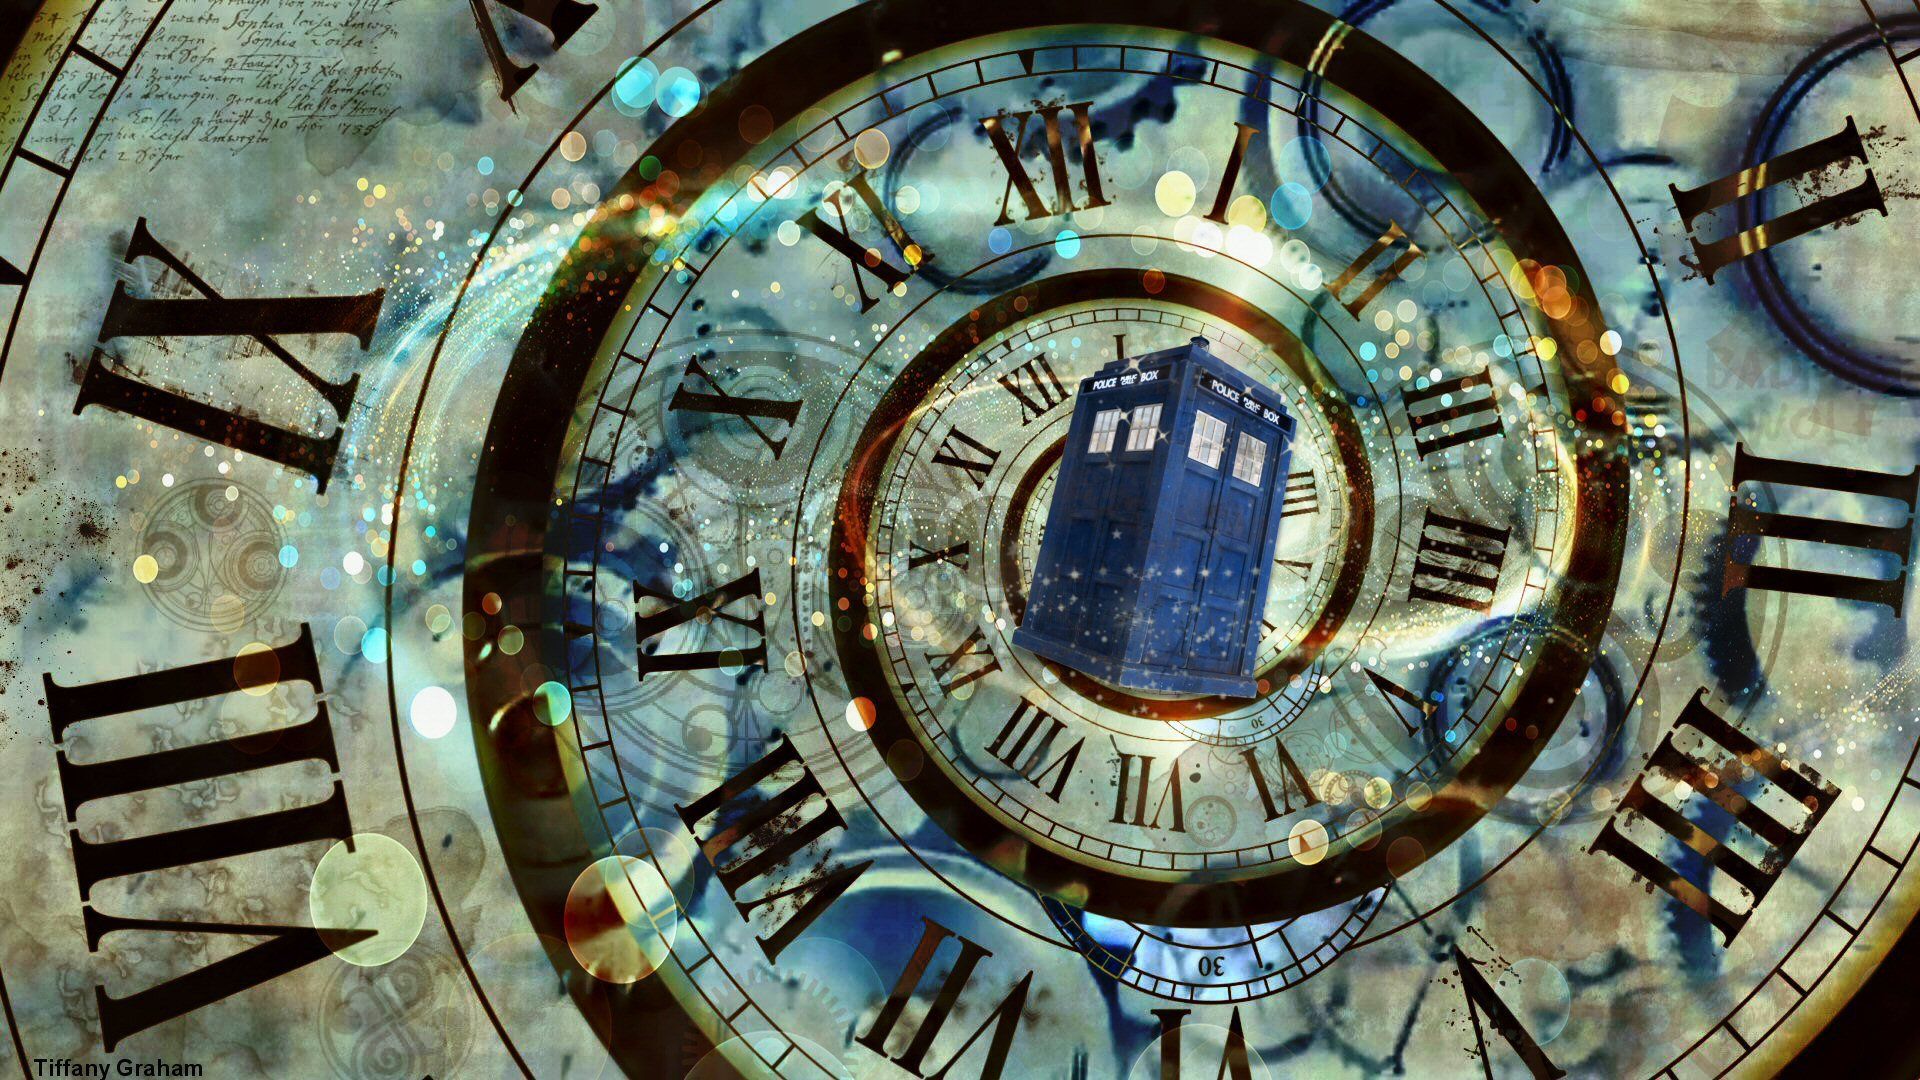 New Doctor Who Tardis Wallpaper D O C T R W H